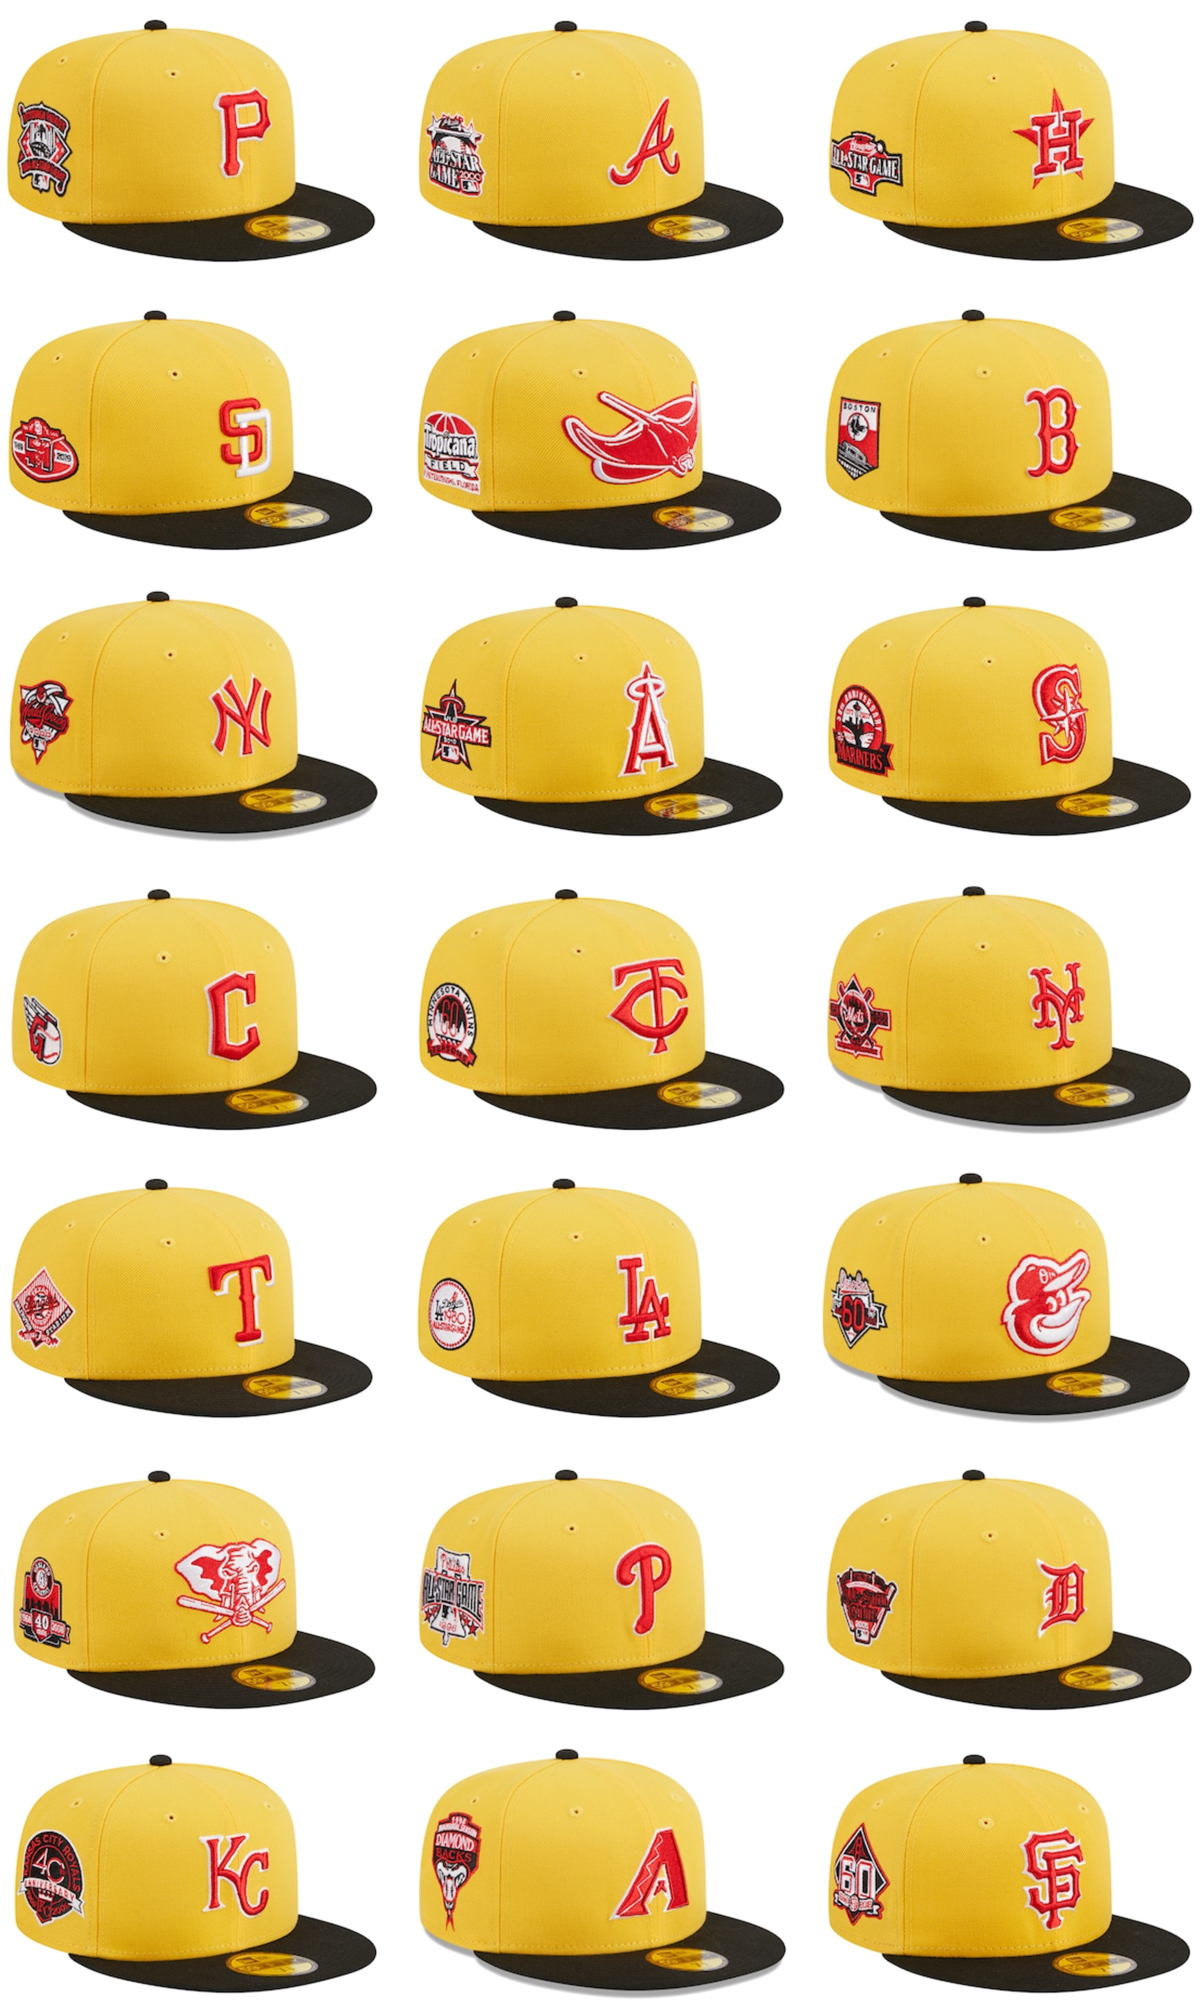 New-Era-MLB-Grilled-59FIFTY-Fitted-Yellow-Black-Hats